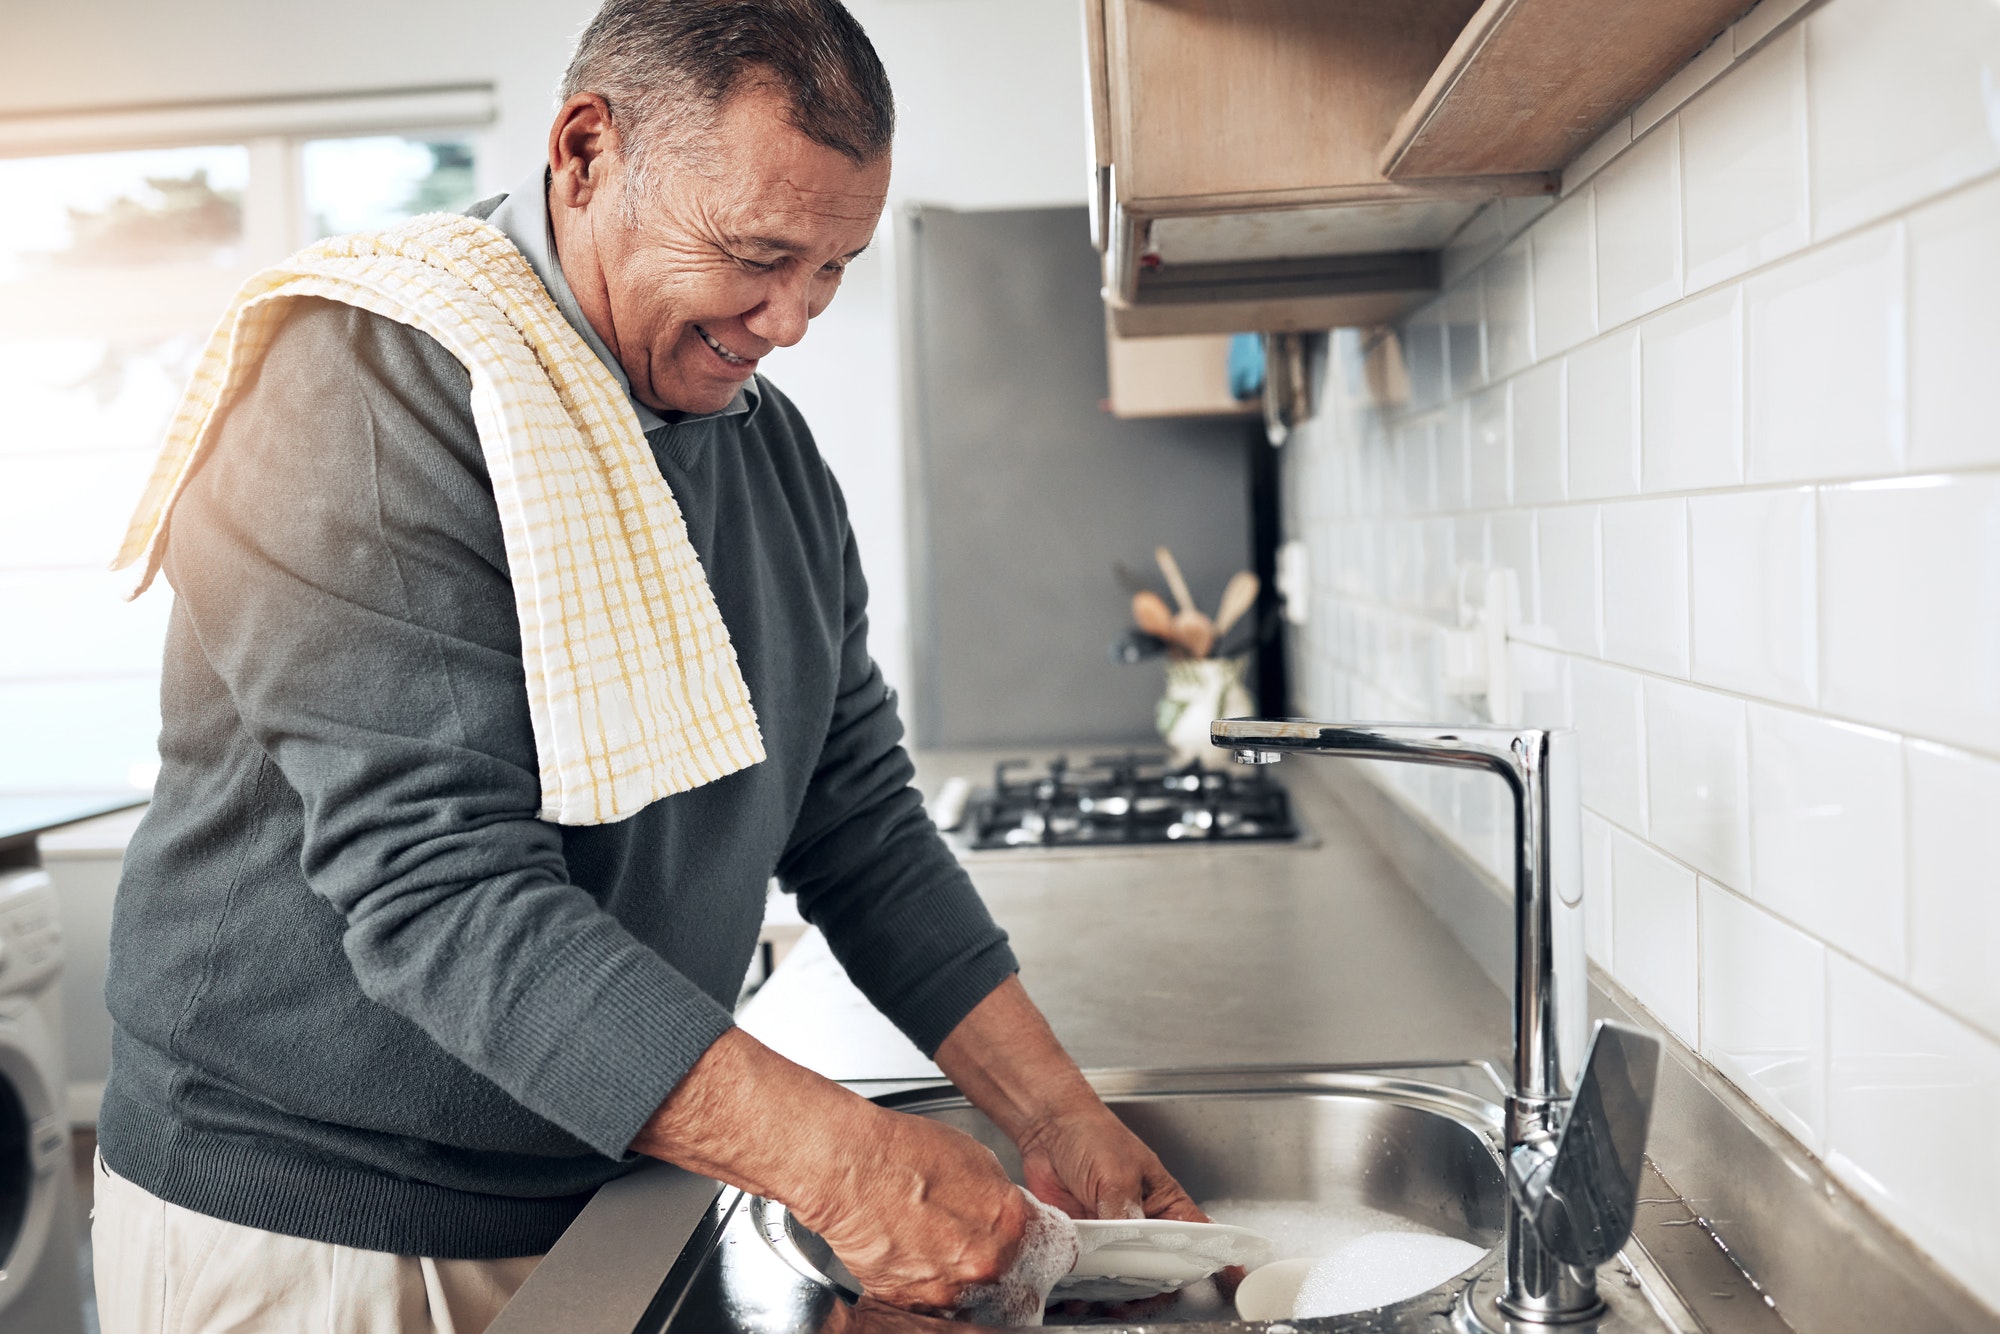 Cleaning, washing dishes or happy old man with soap and water in the kitchen sink in healthy home.